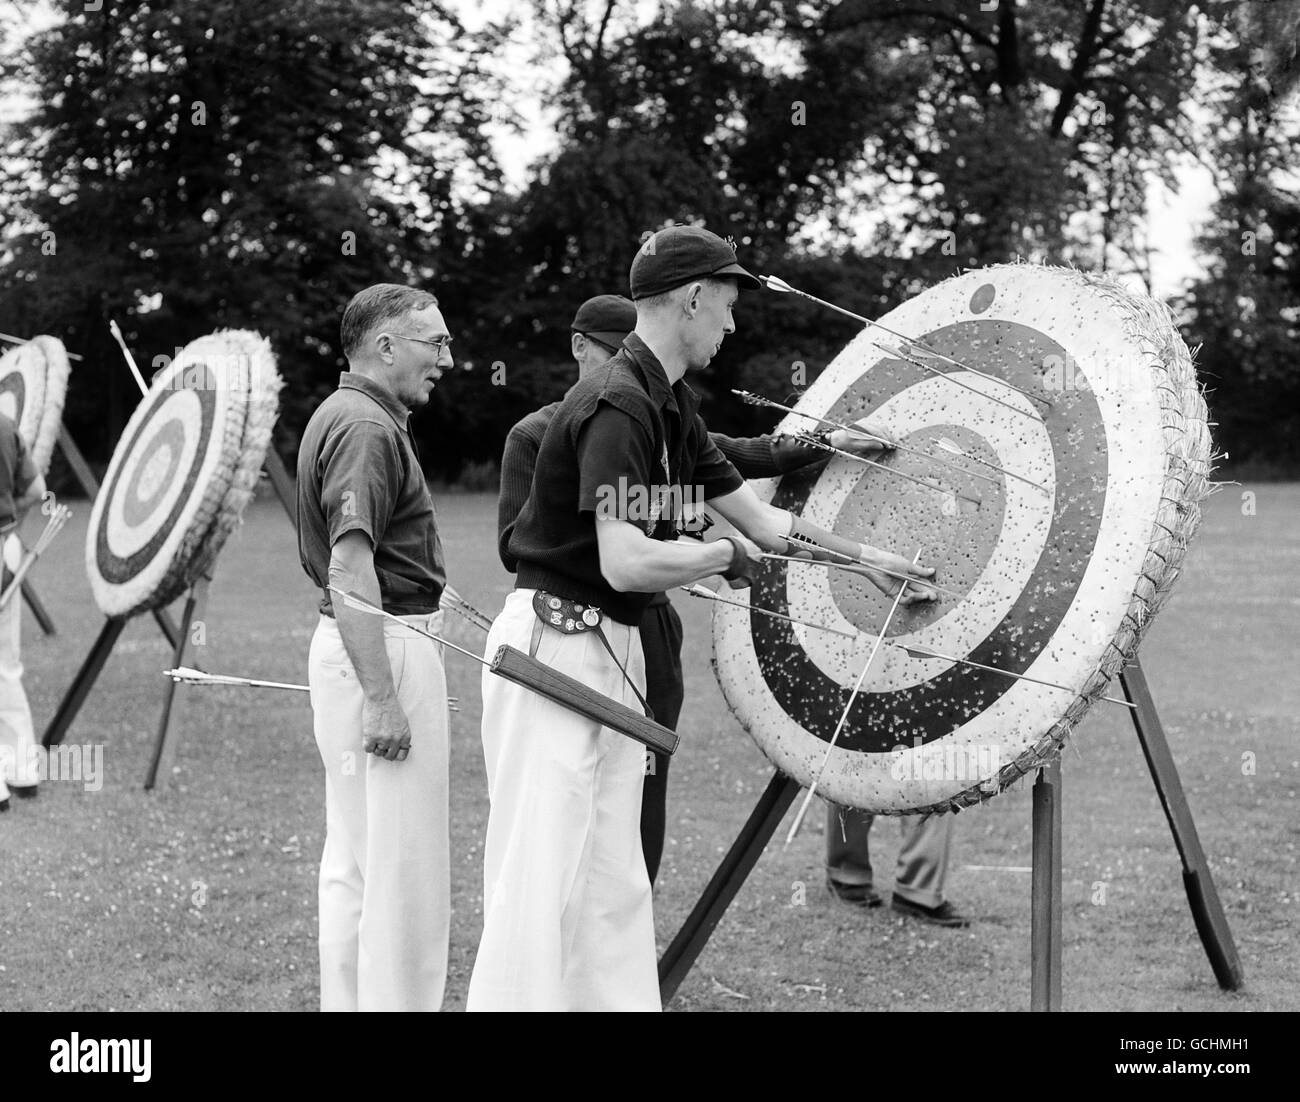 The Grand National Archery Societies 98th meeting - Worcester College Cricket Ground, Oxford. Mr Anthony Wood of RTS & Warwick Archery club draws his arrows from the target after scoring a ball Stock Photo